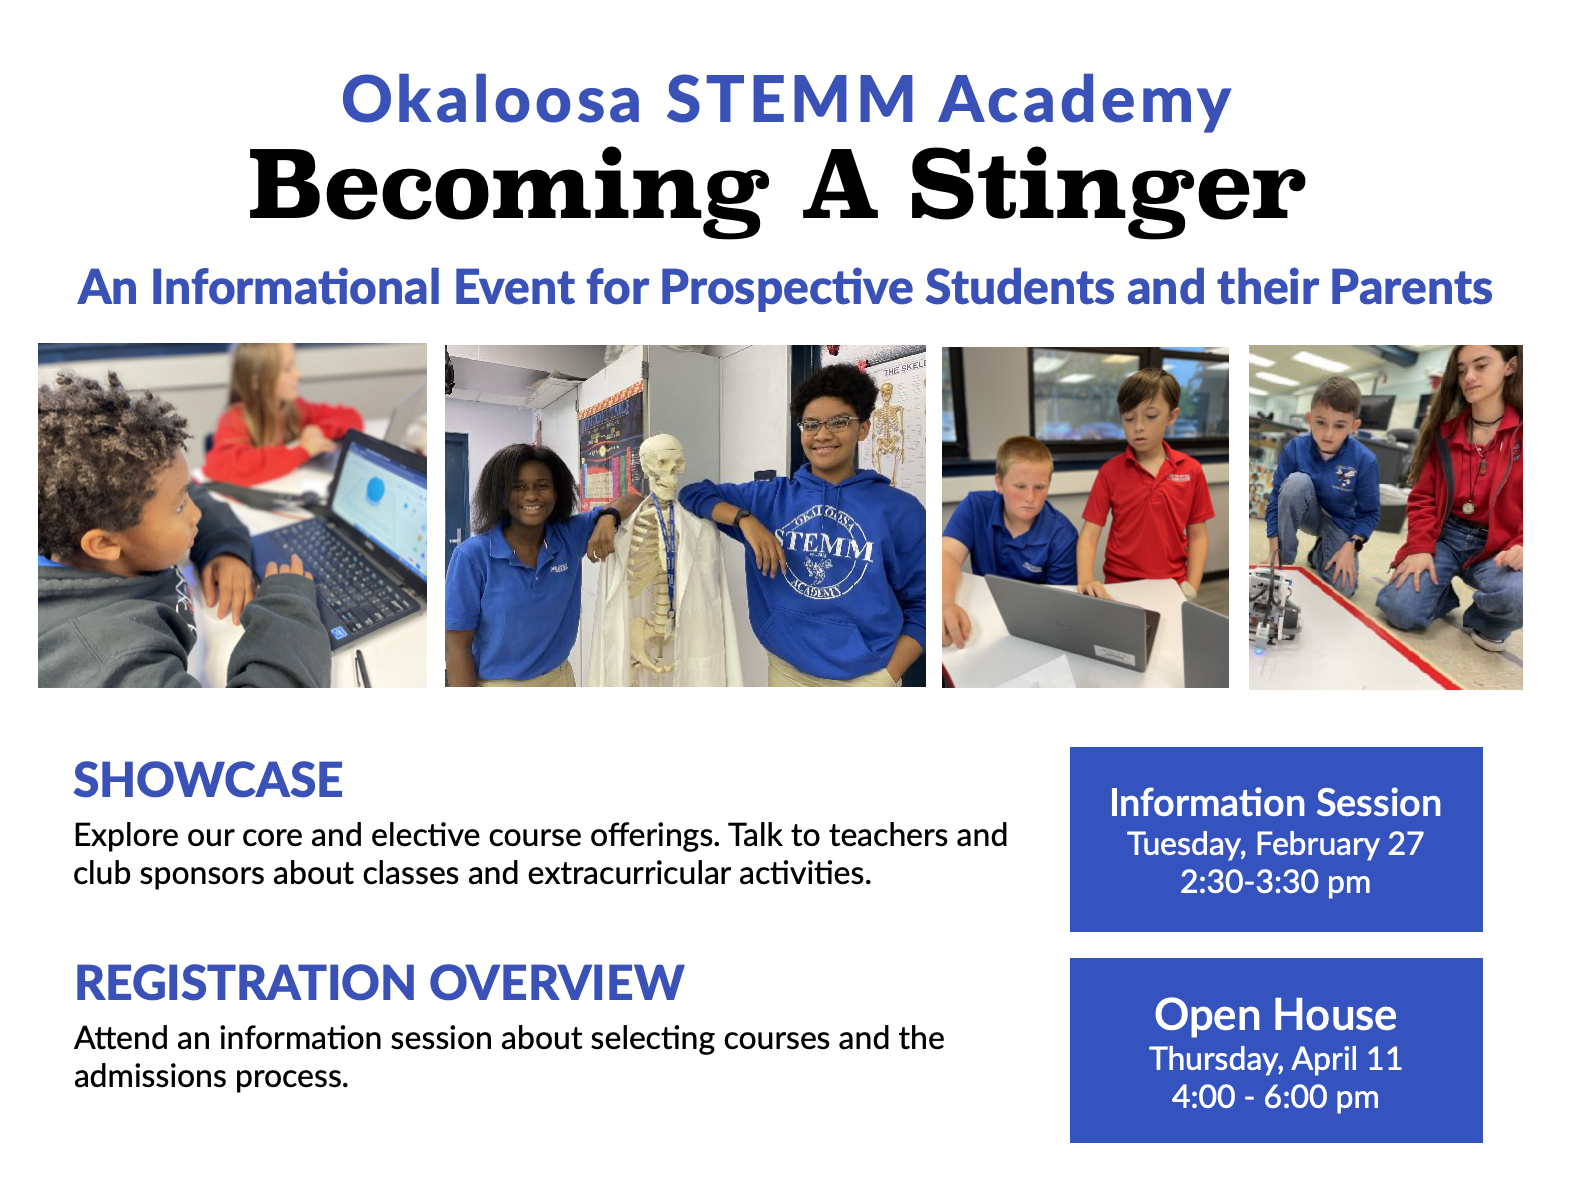 Becoming A Stinger Information Session February 27 from 2:30 until 3:30